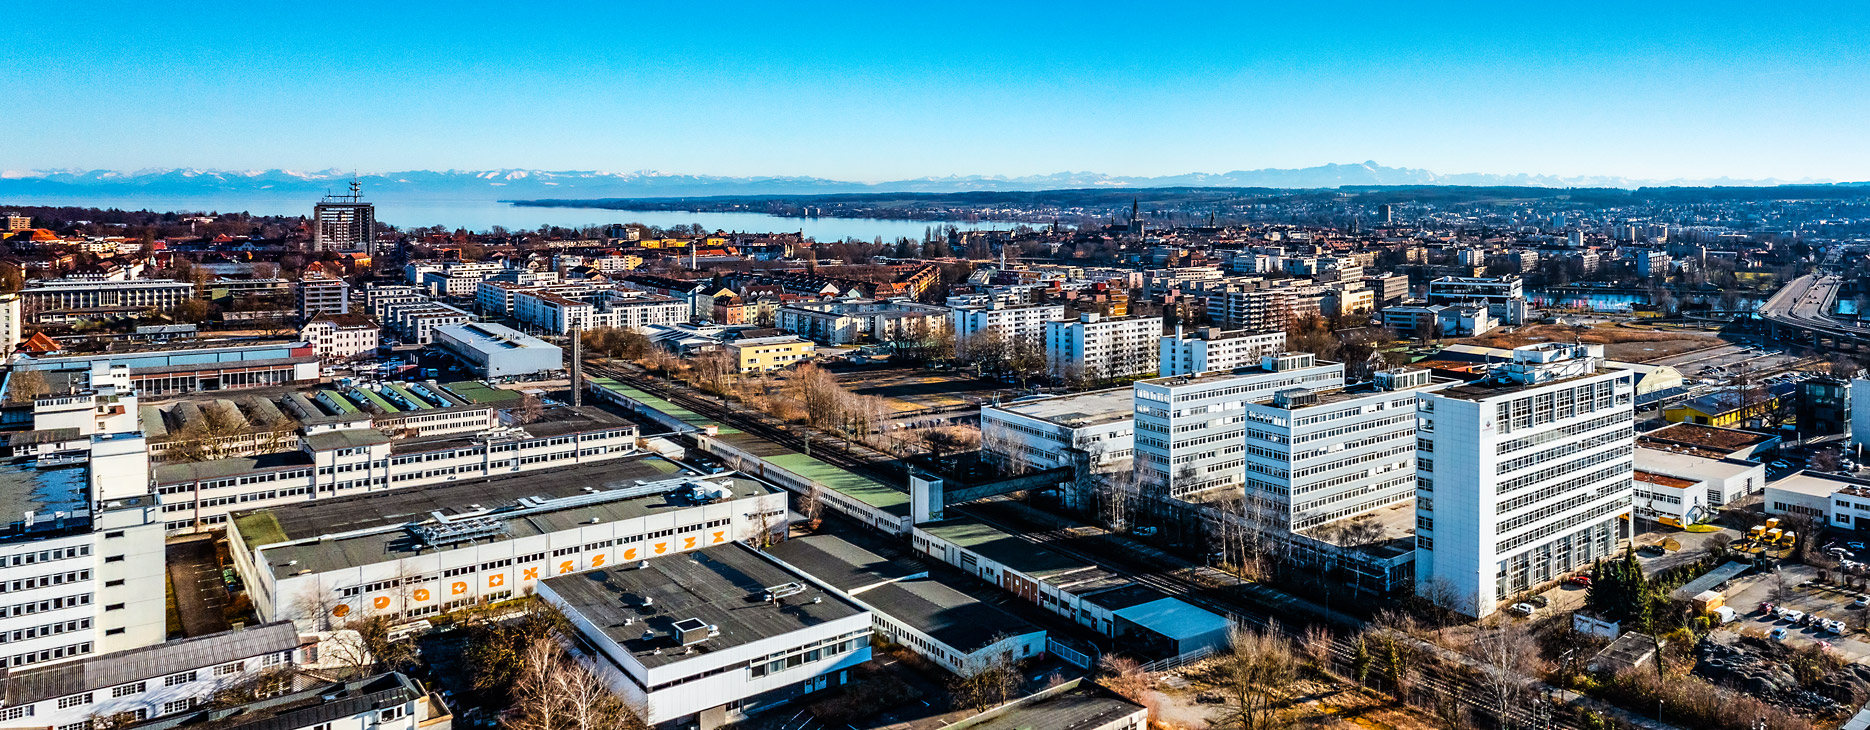 Panoramic view of Konstanz, parts of Lake Constance and the Alps